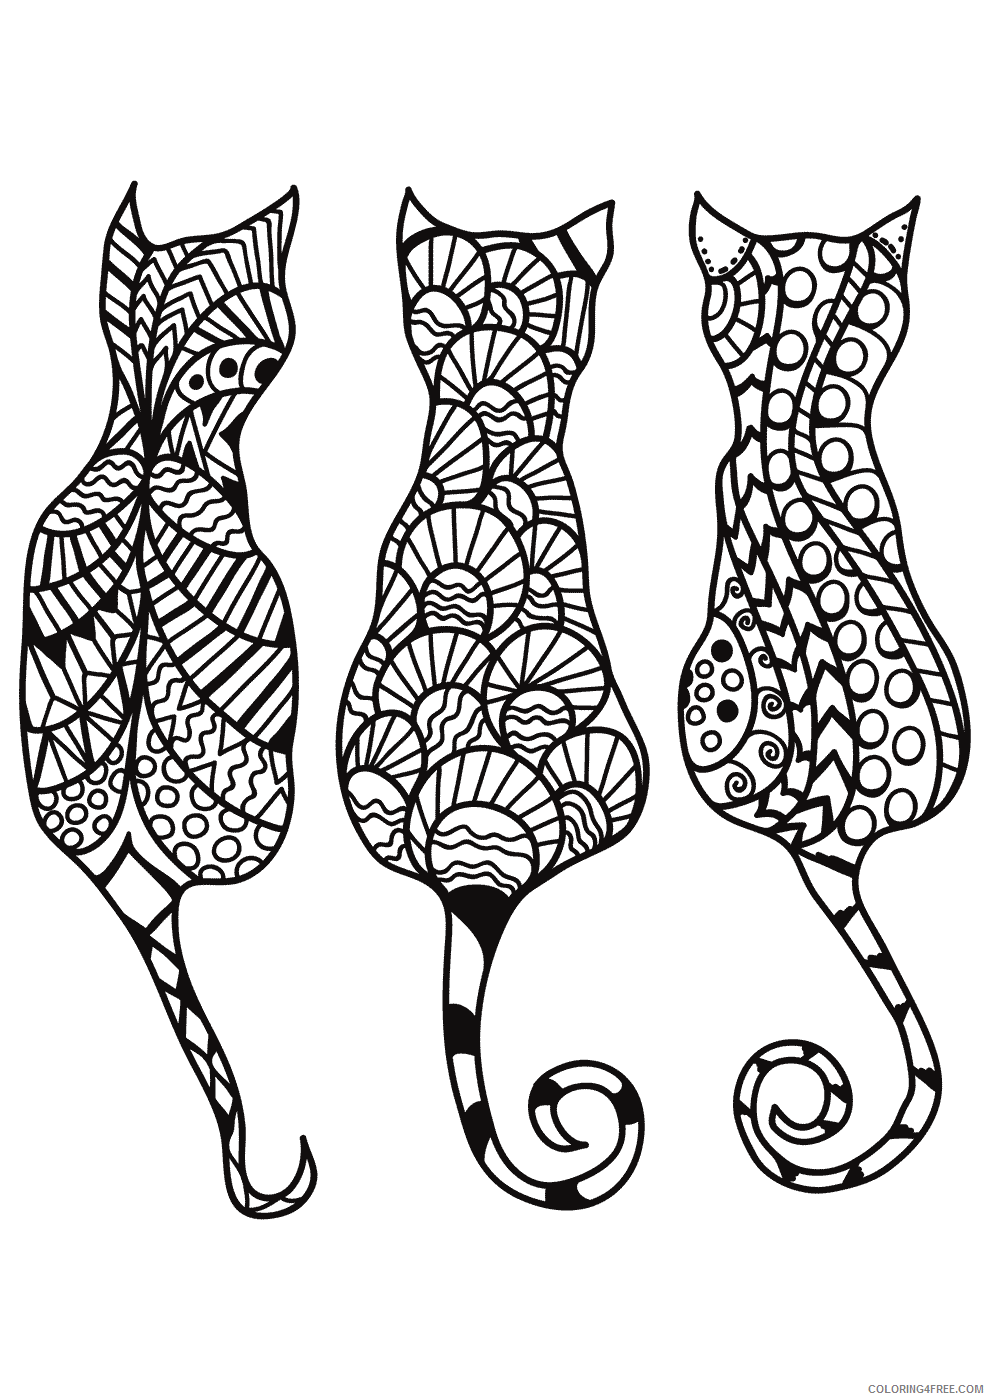 Animal Zentangle Coloring Pages Zentangle Cats Printable 2020 233 Coloring4free